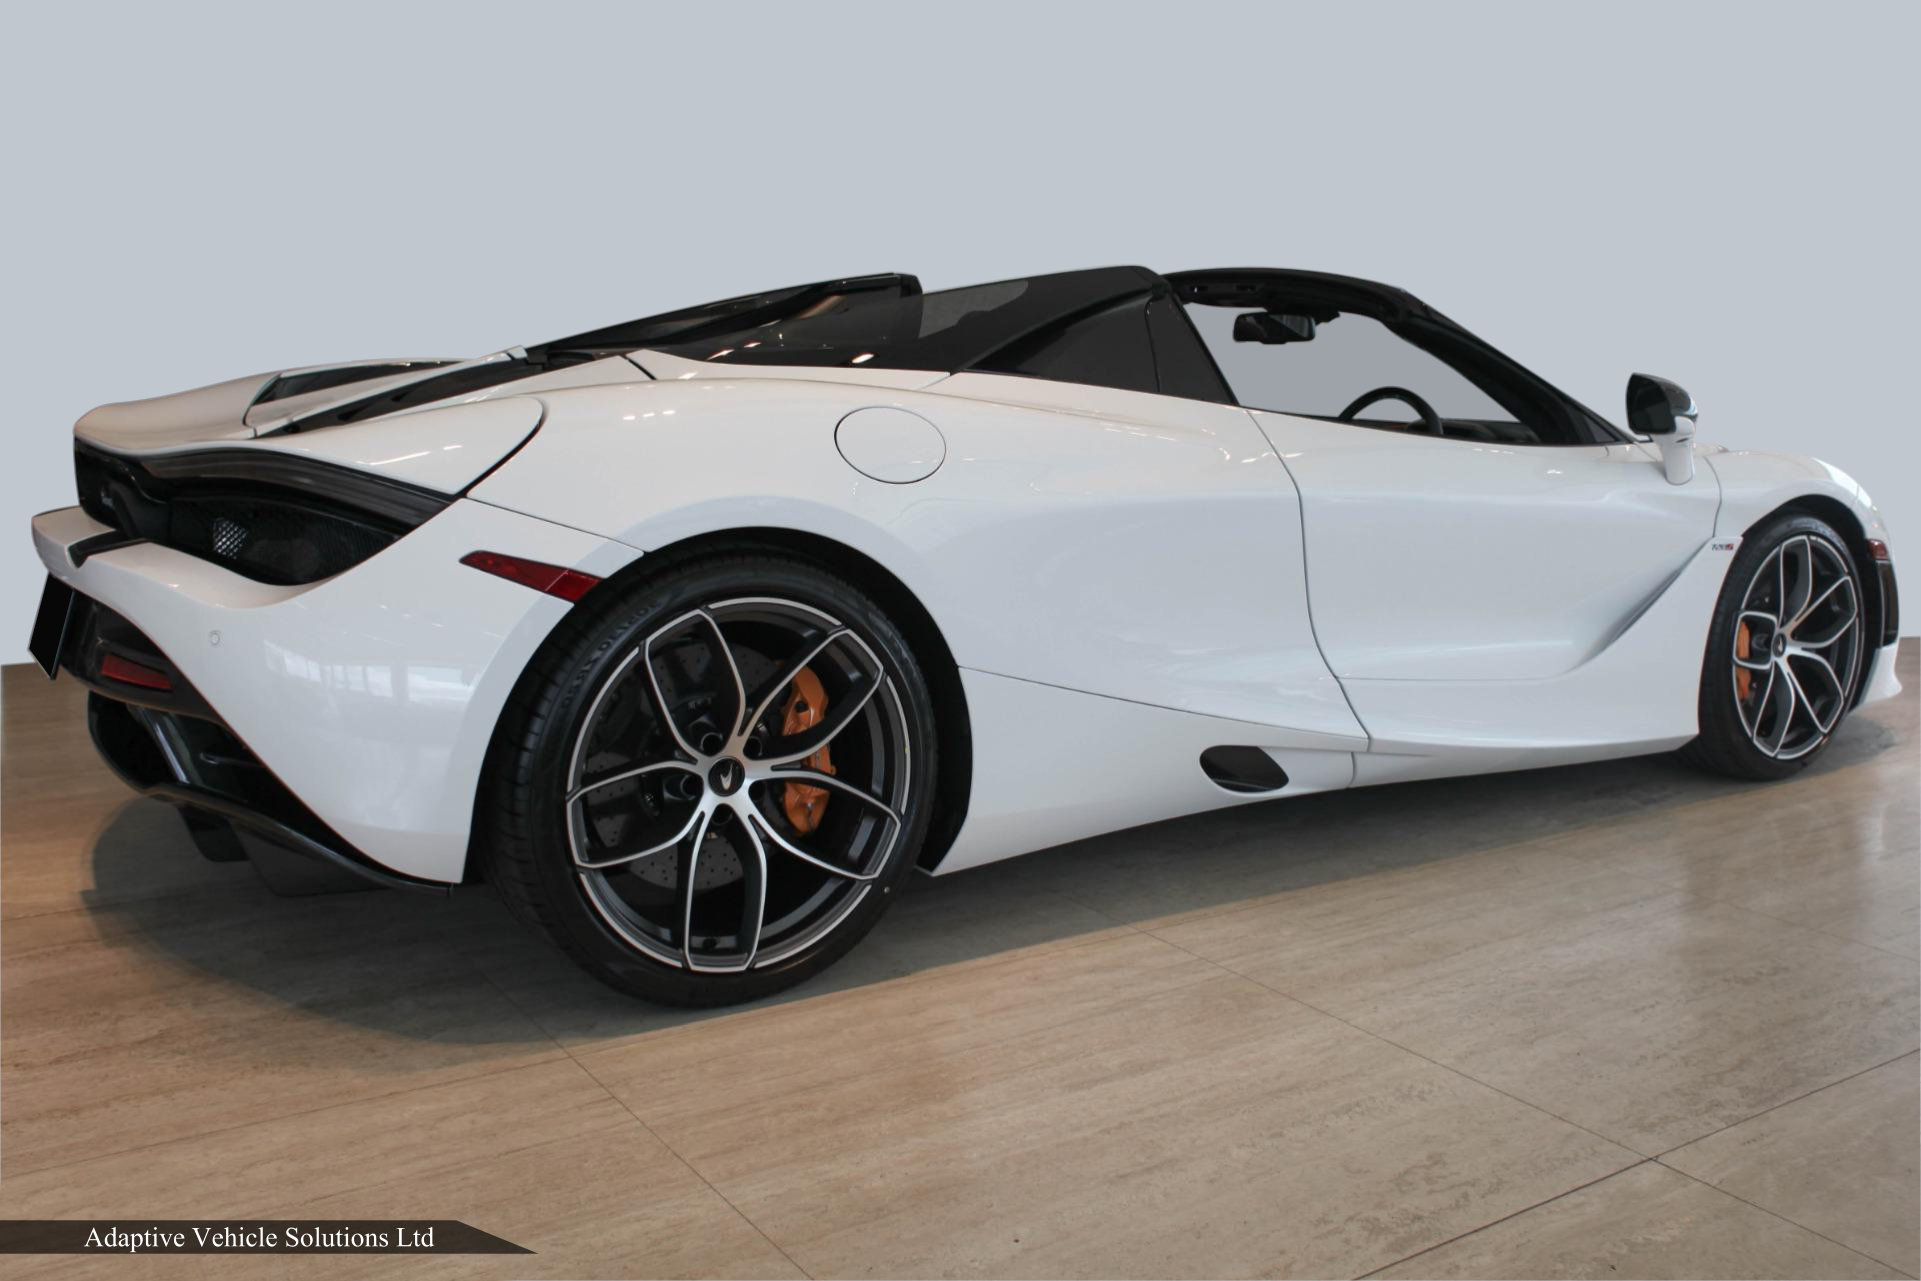 2021 McLaren 720s Spider Pearl White off side rear view